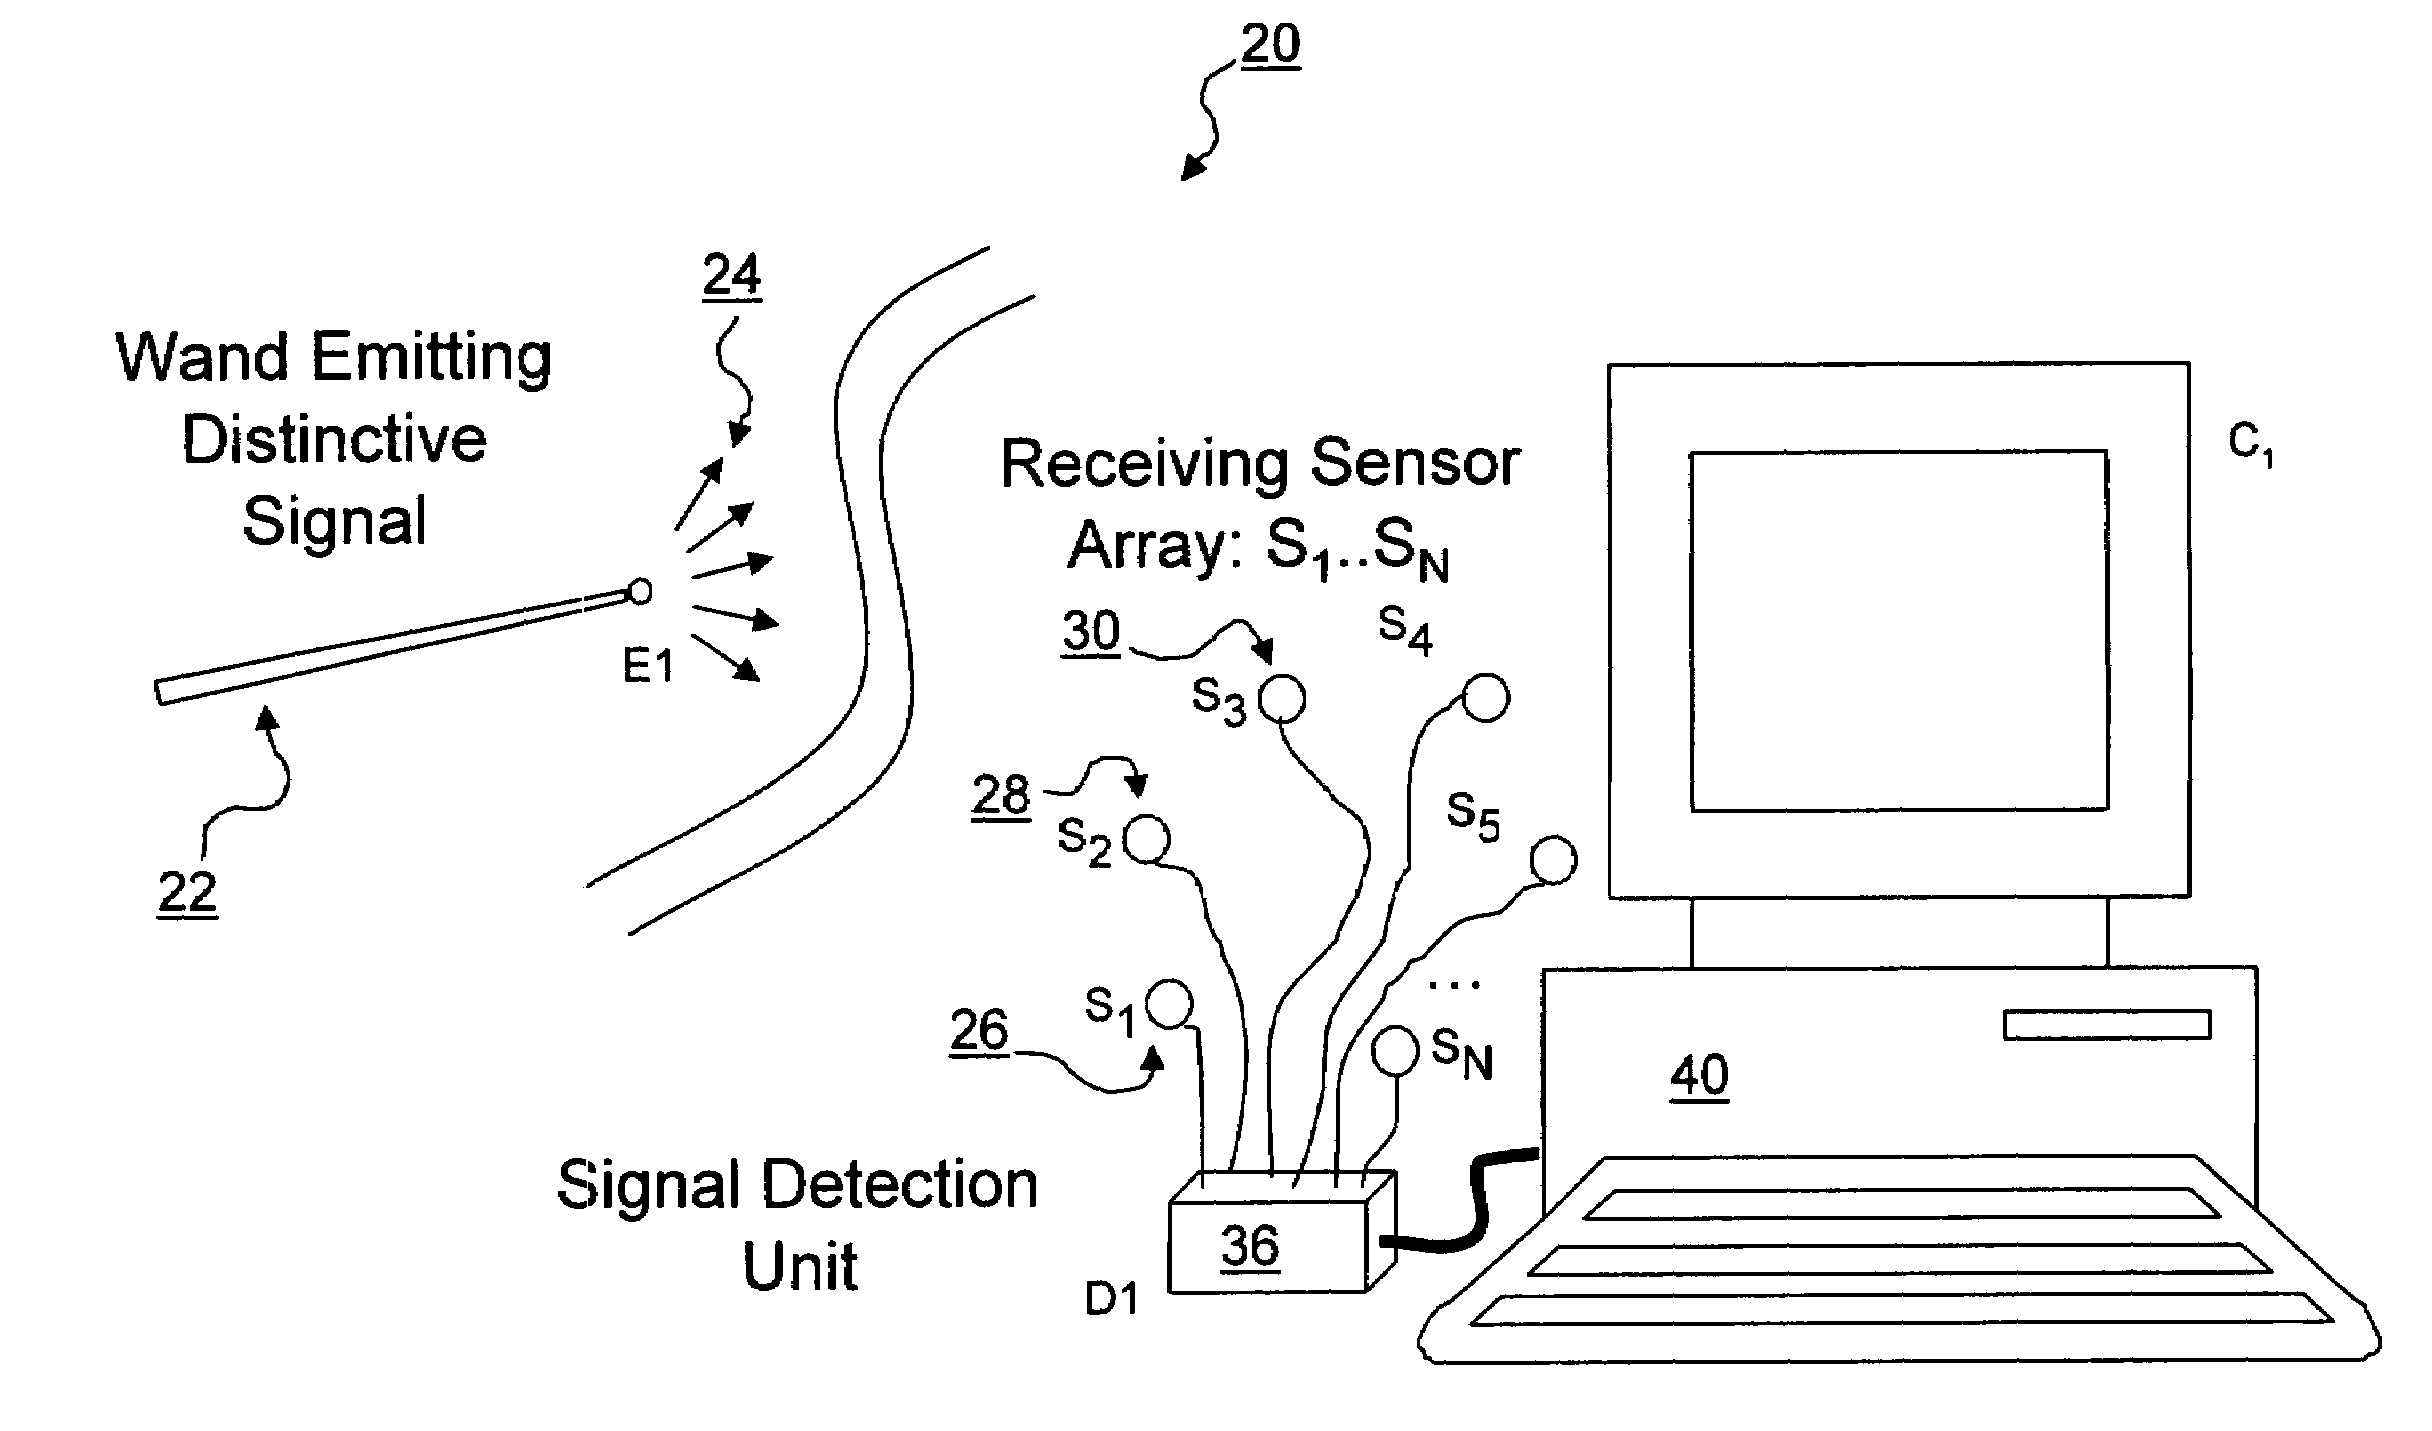 Three-dimensional position and motion telemetry input